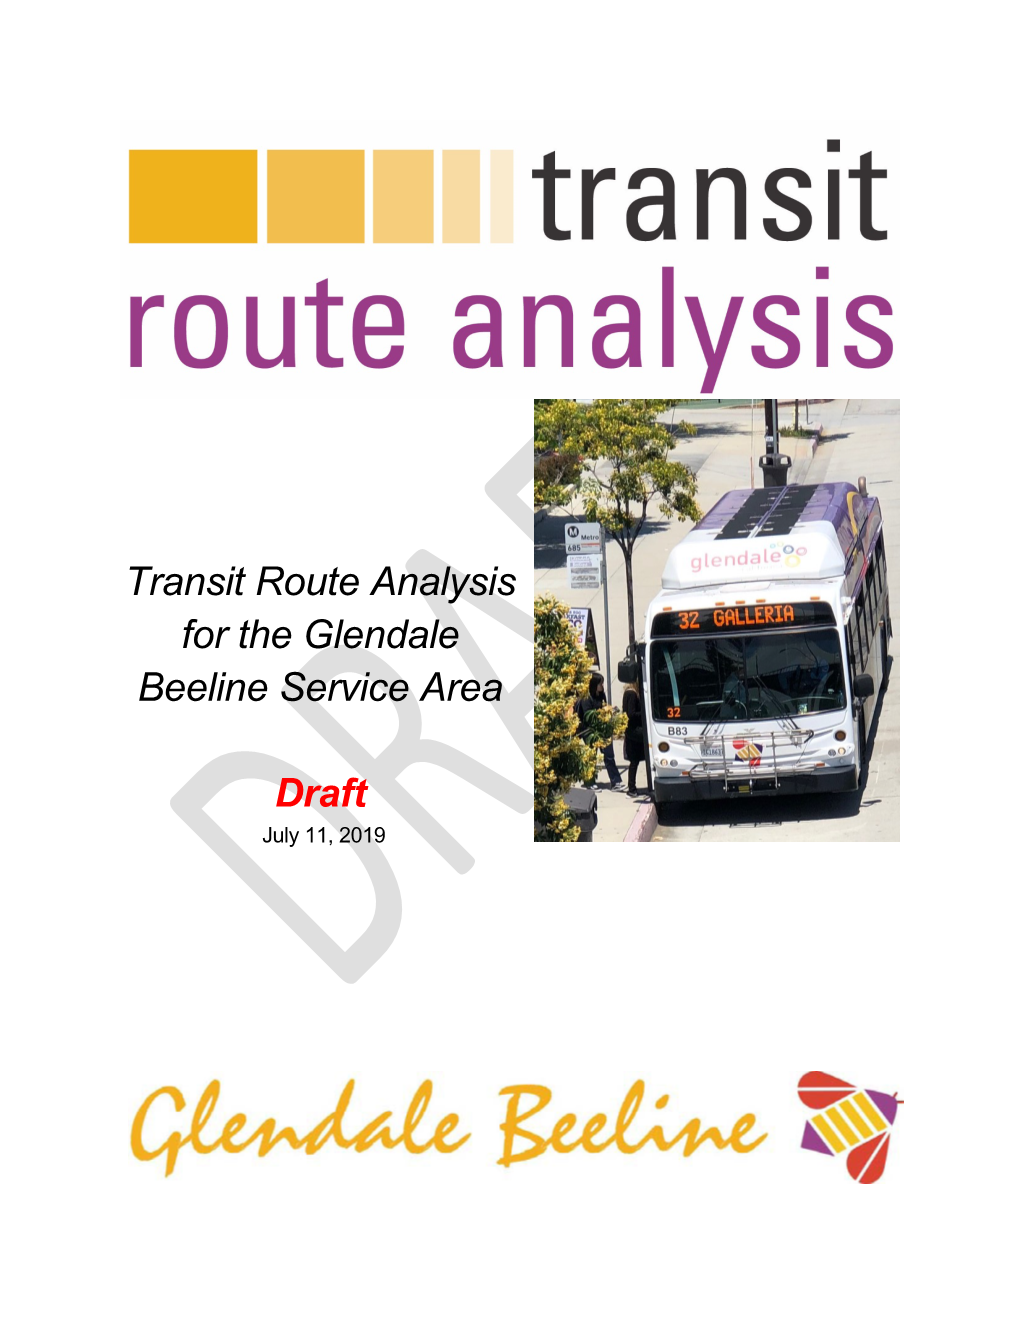 Transit Route Analysis for the Glendale Beeline Service Area Draft